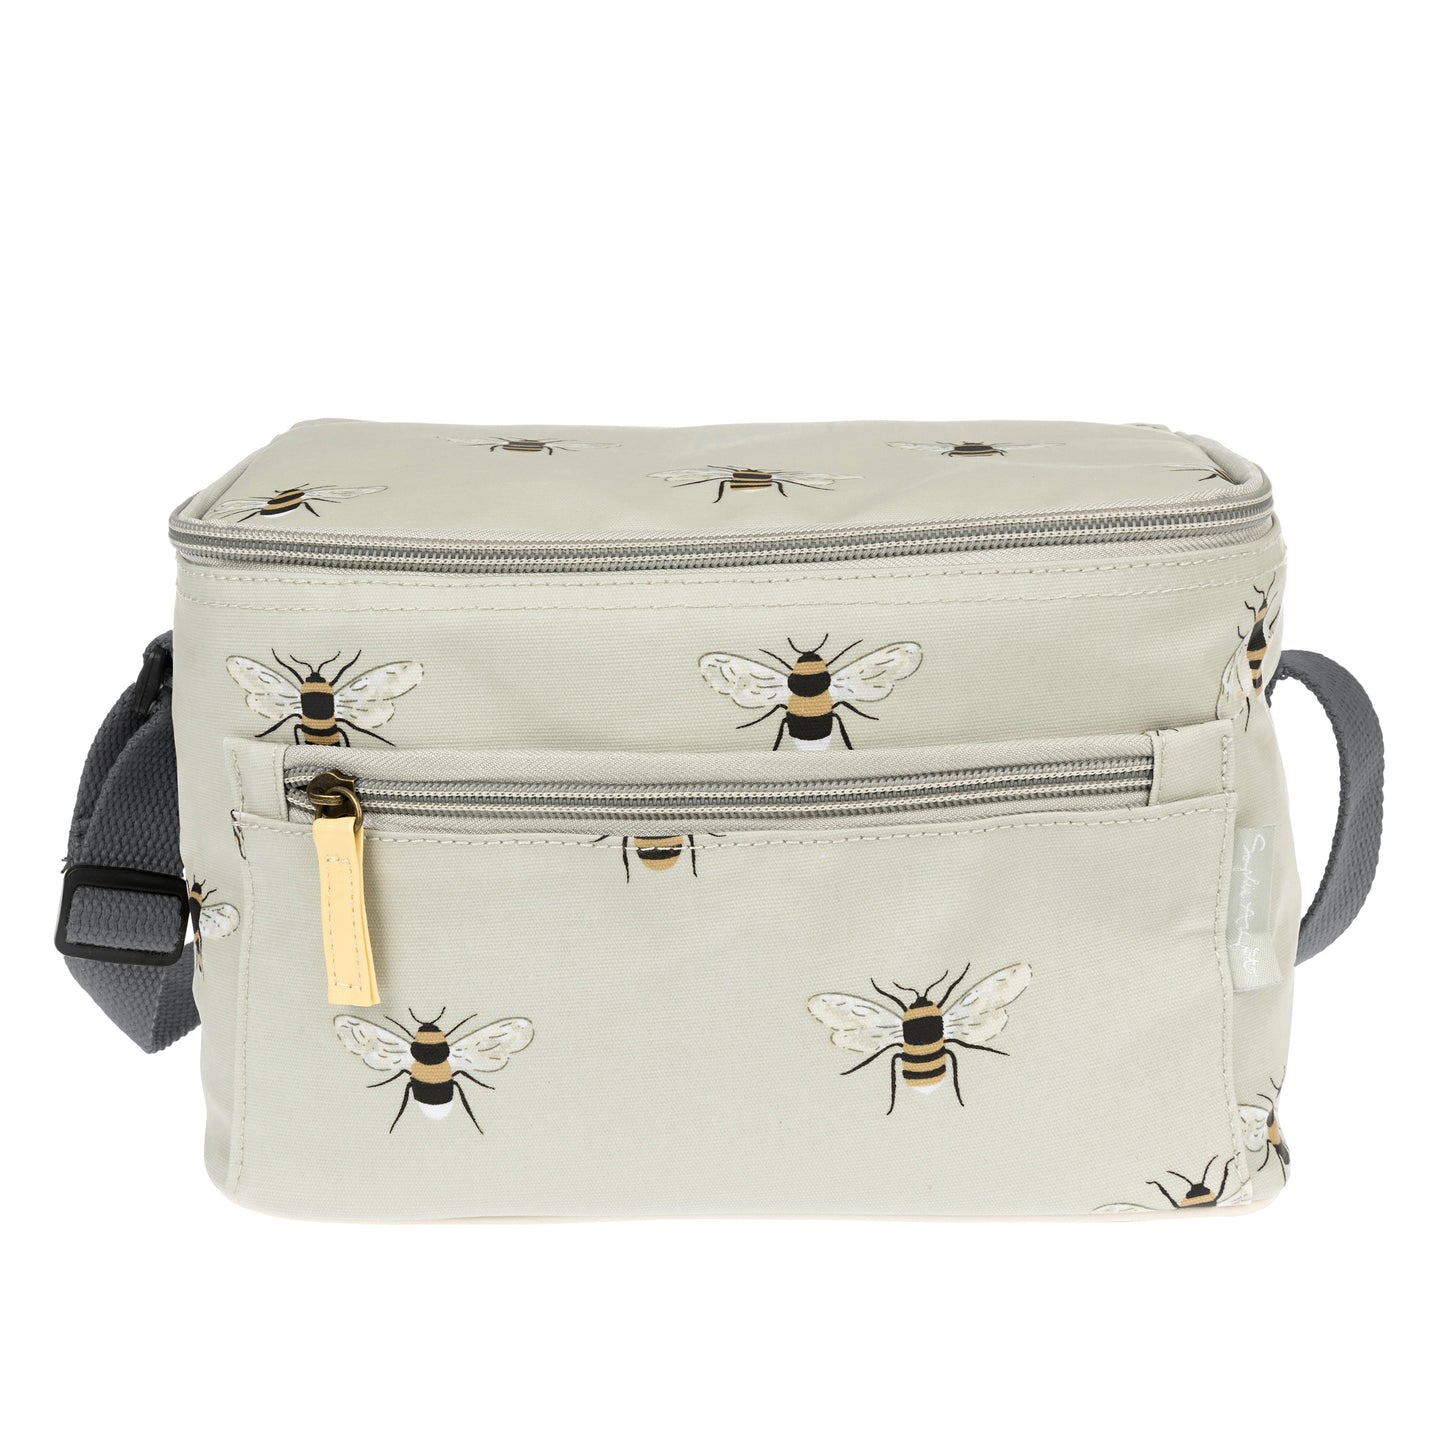 Sophie Allport Insulated Lunch Bag, Bees